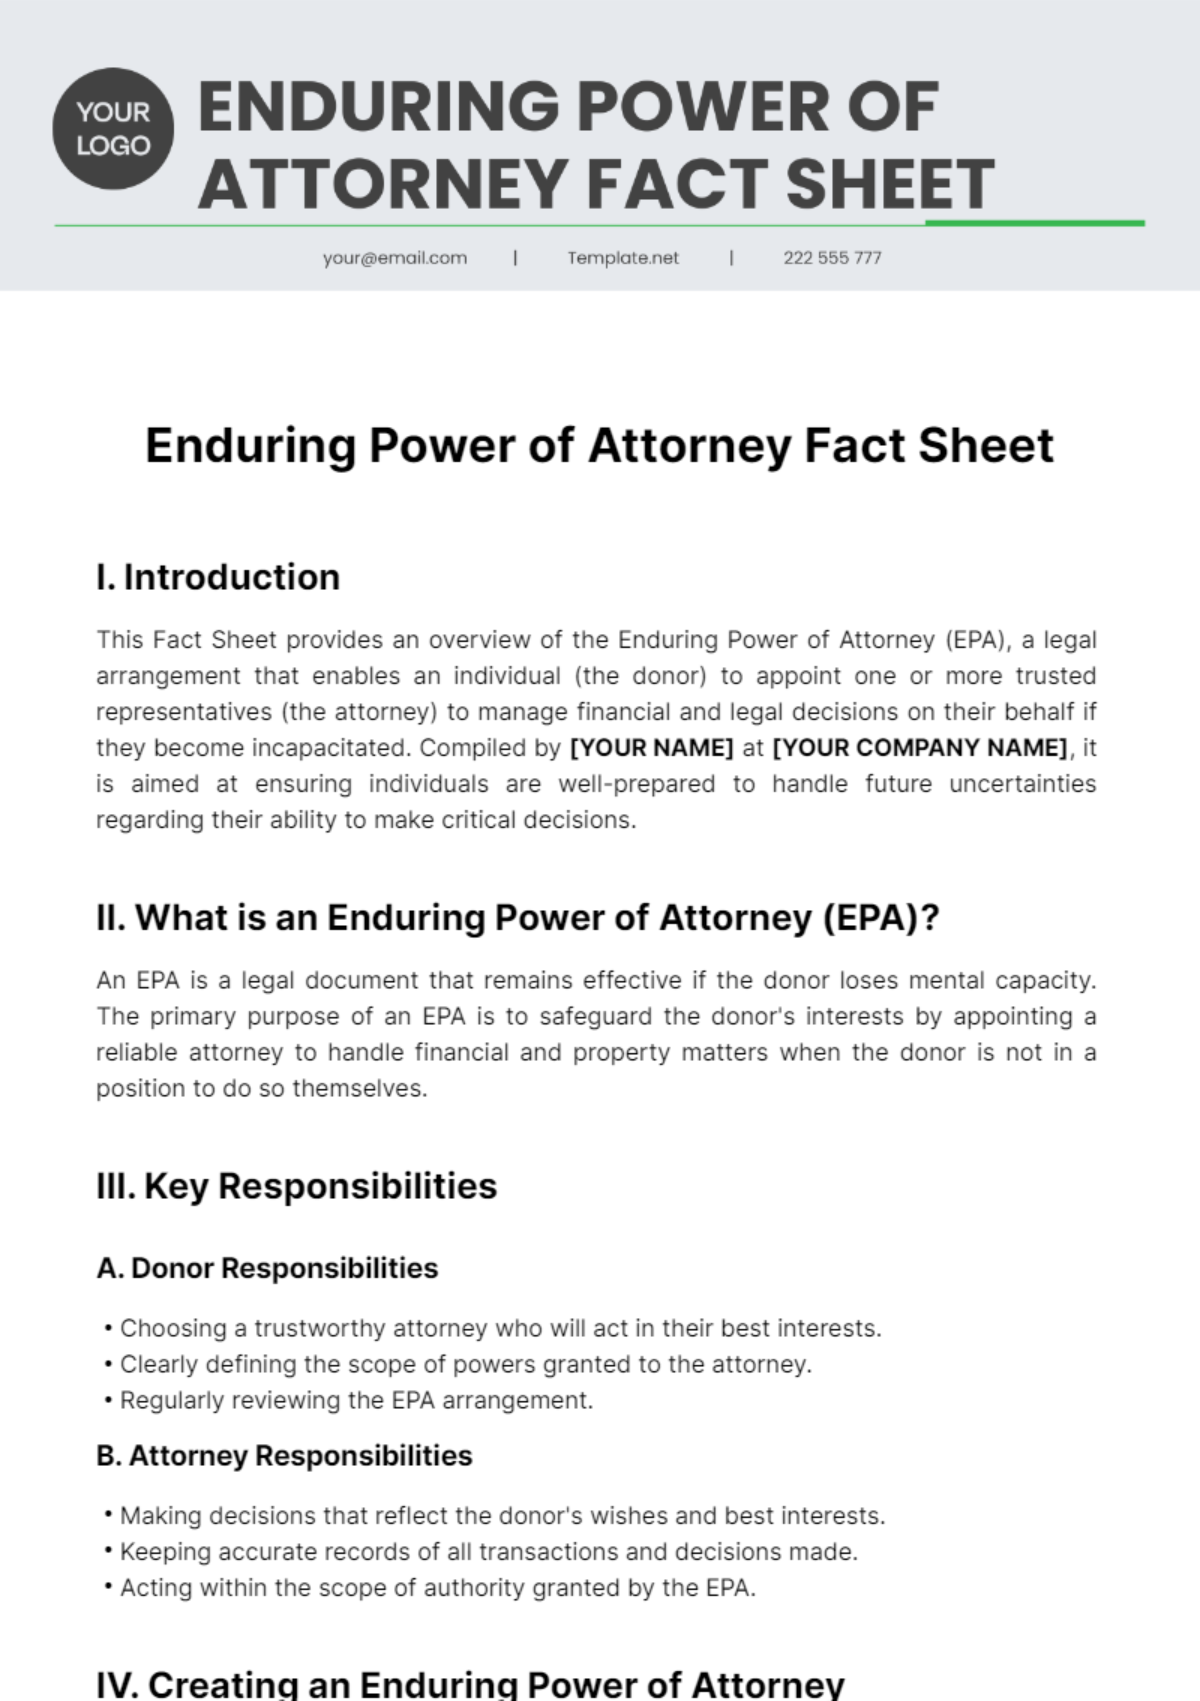 Free Enduring Power Of Attorney Fact Sheet Template